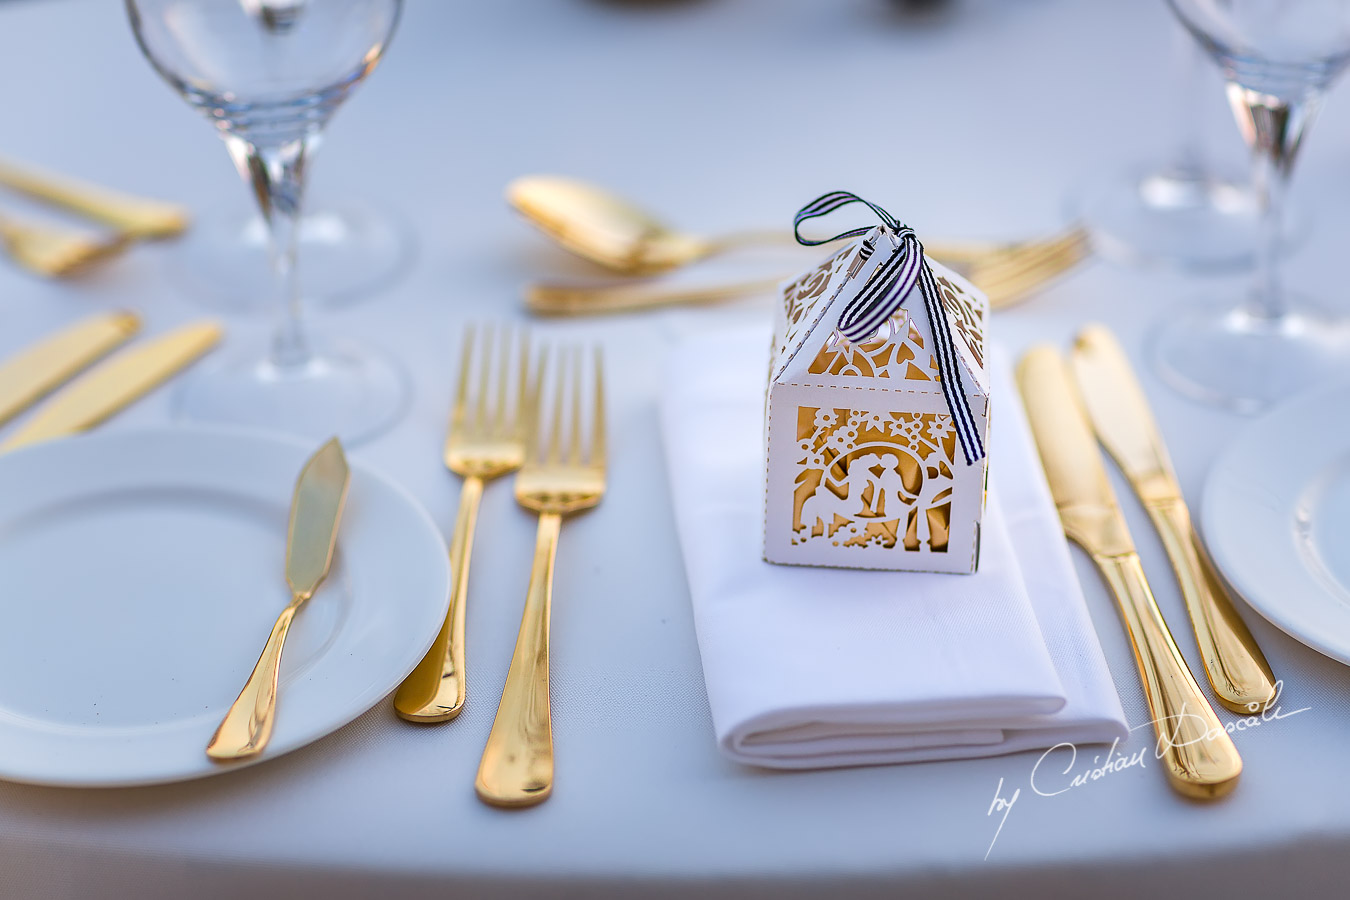 Simply beautiful wedding details captured by Cristian Dascalu at an amazing Wedding at Elea Estate in Paphos, Cyprus.